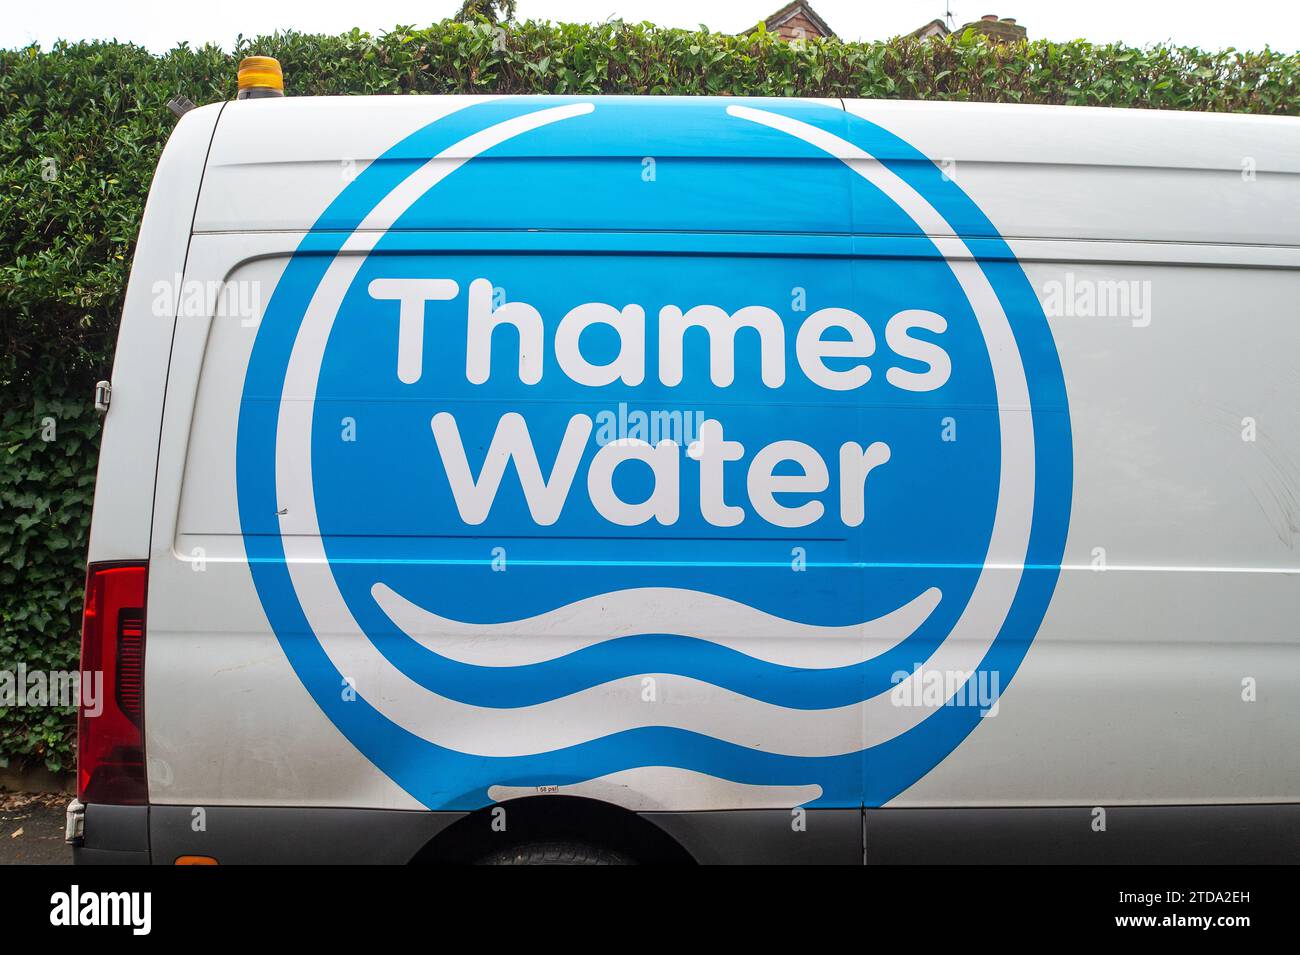 Datchet, UK. 16th December, 2023. A Thames Water van in Datchet, Berkshire. This week a new CEO has been appointed to troubled private water company, Thames Water. Chris Weston has been appointed this week as the new CEO of Thames Water. Weston was a former British Gas Executive, part of Centrica. The parent company of Thames Water, Kemble Water Holdings, has had its credit rating downgraded for the second time in six months. There continue to be calls for Thames Water to be brought back into Government ownership. Credit: Maureen McLean/Alamy Stock Photo